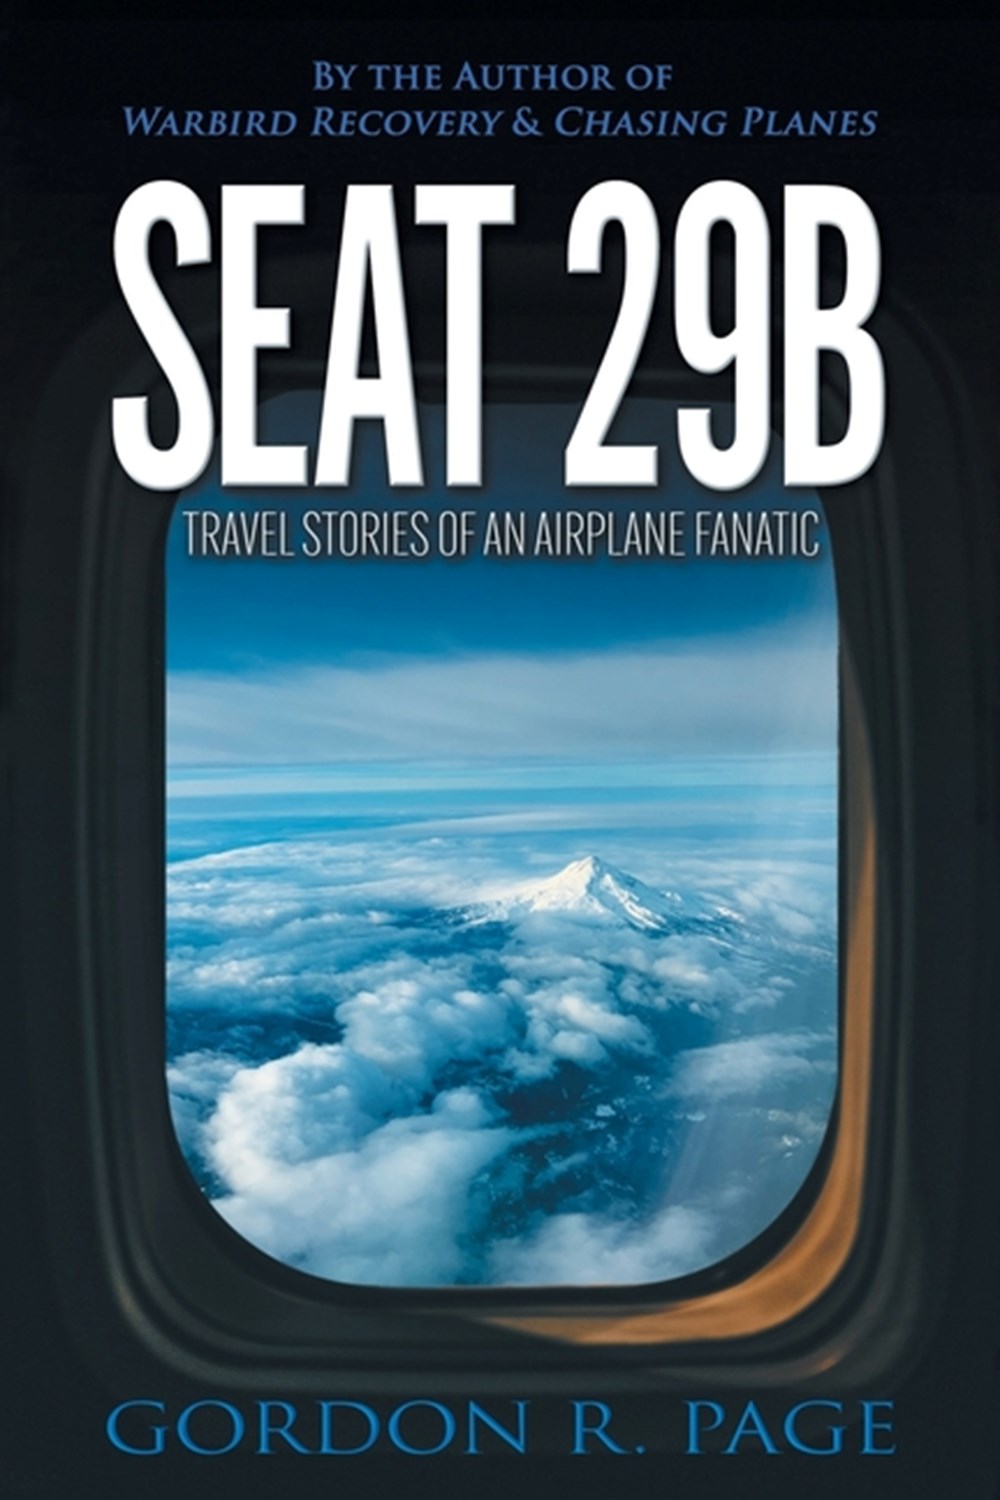 Seat 29B Travel Stories of an Airplane Fanatic